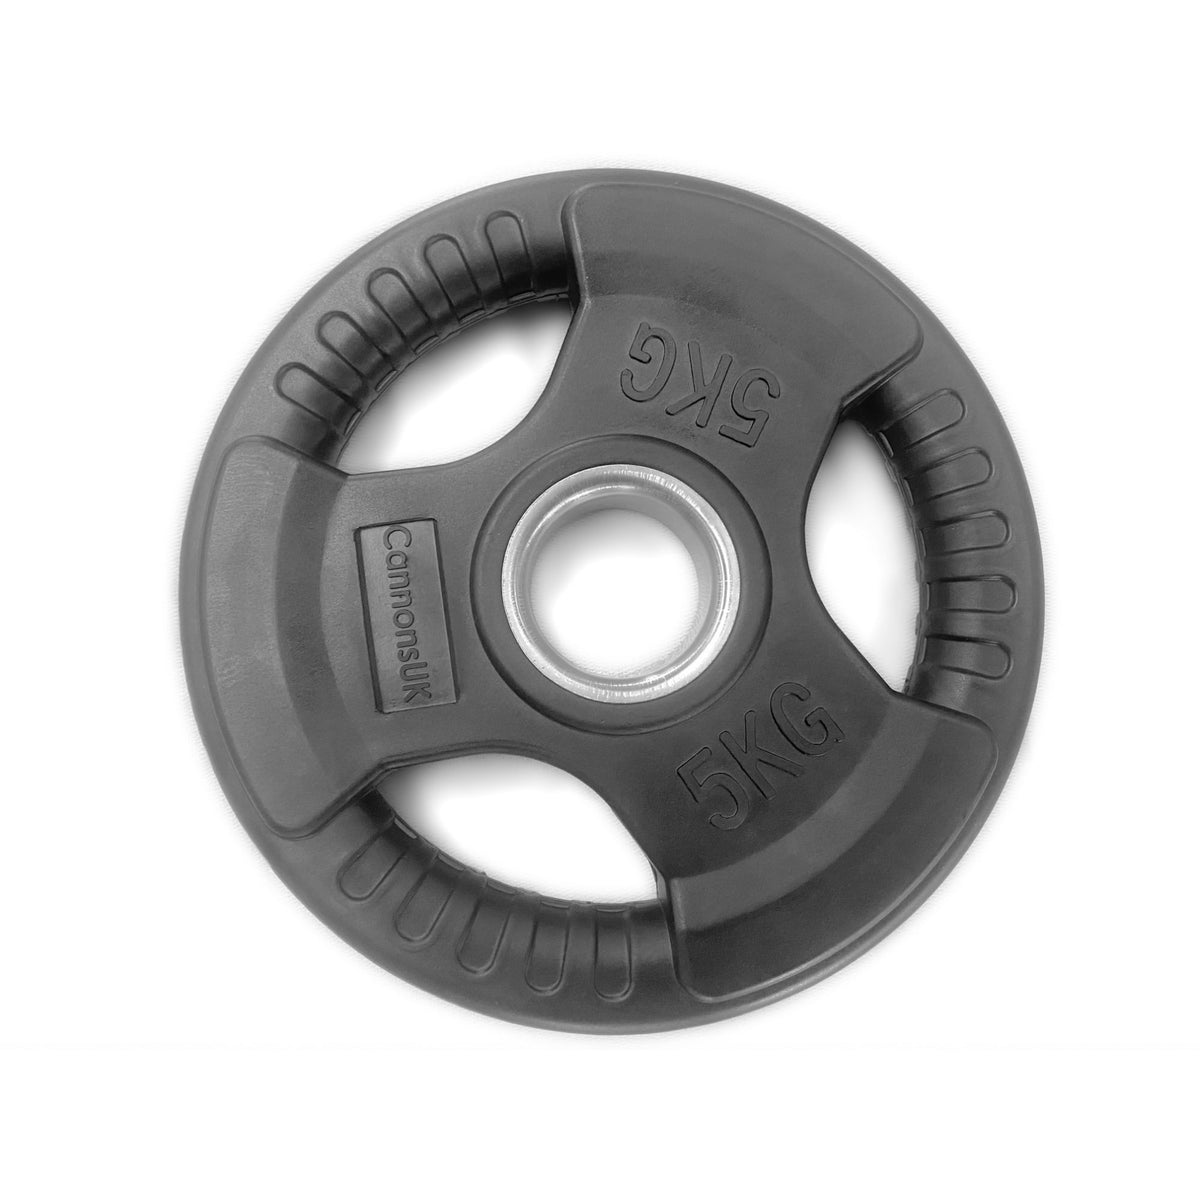 Tri Grip Olympic Weight plates 5kg to 25kg - Cannons UK